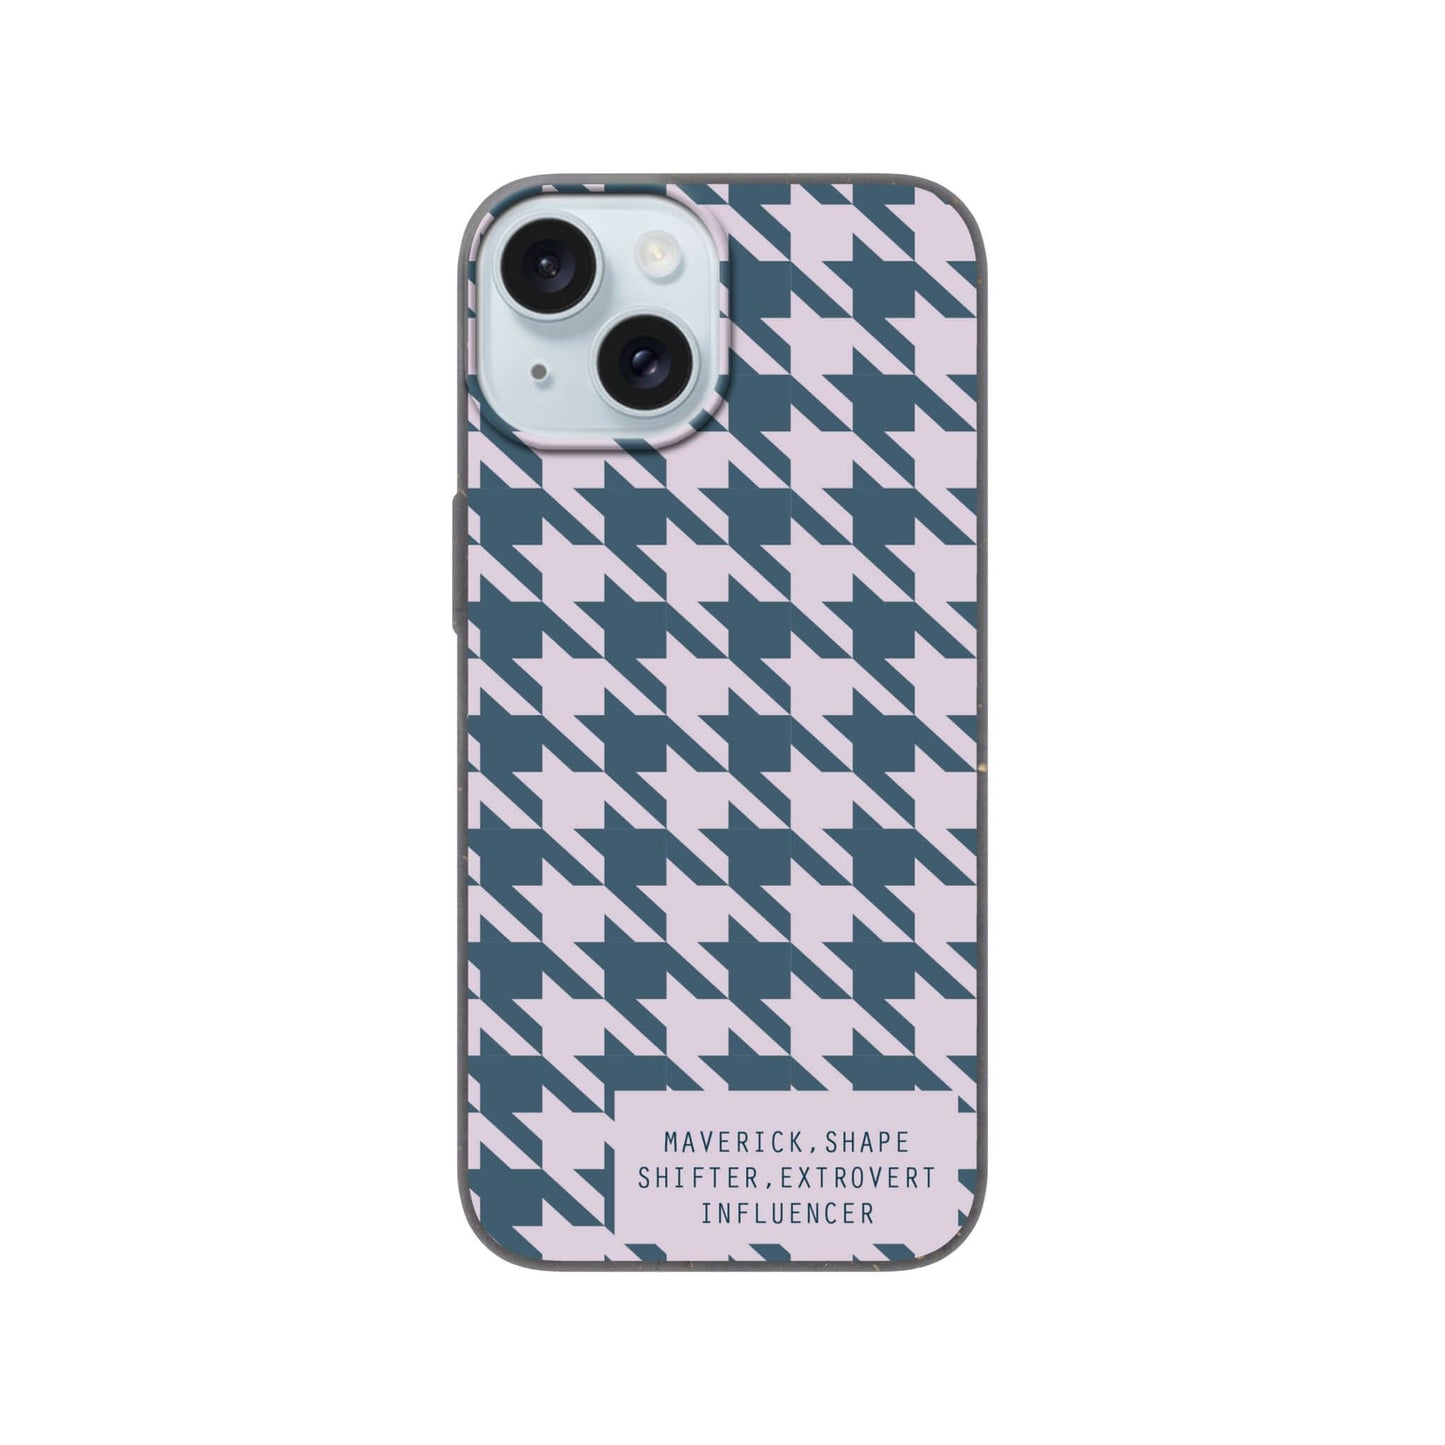 Biodegradable phone case with houndstooth print